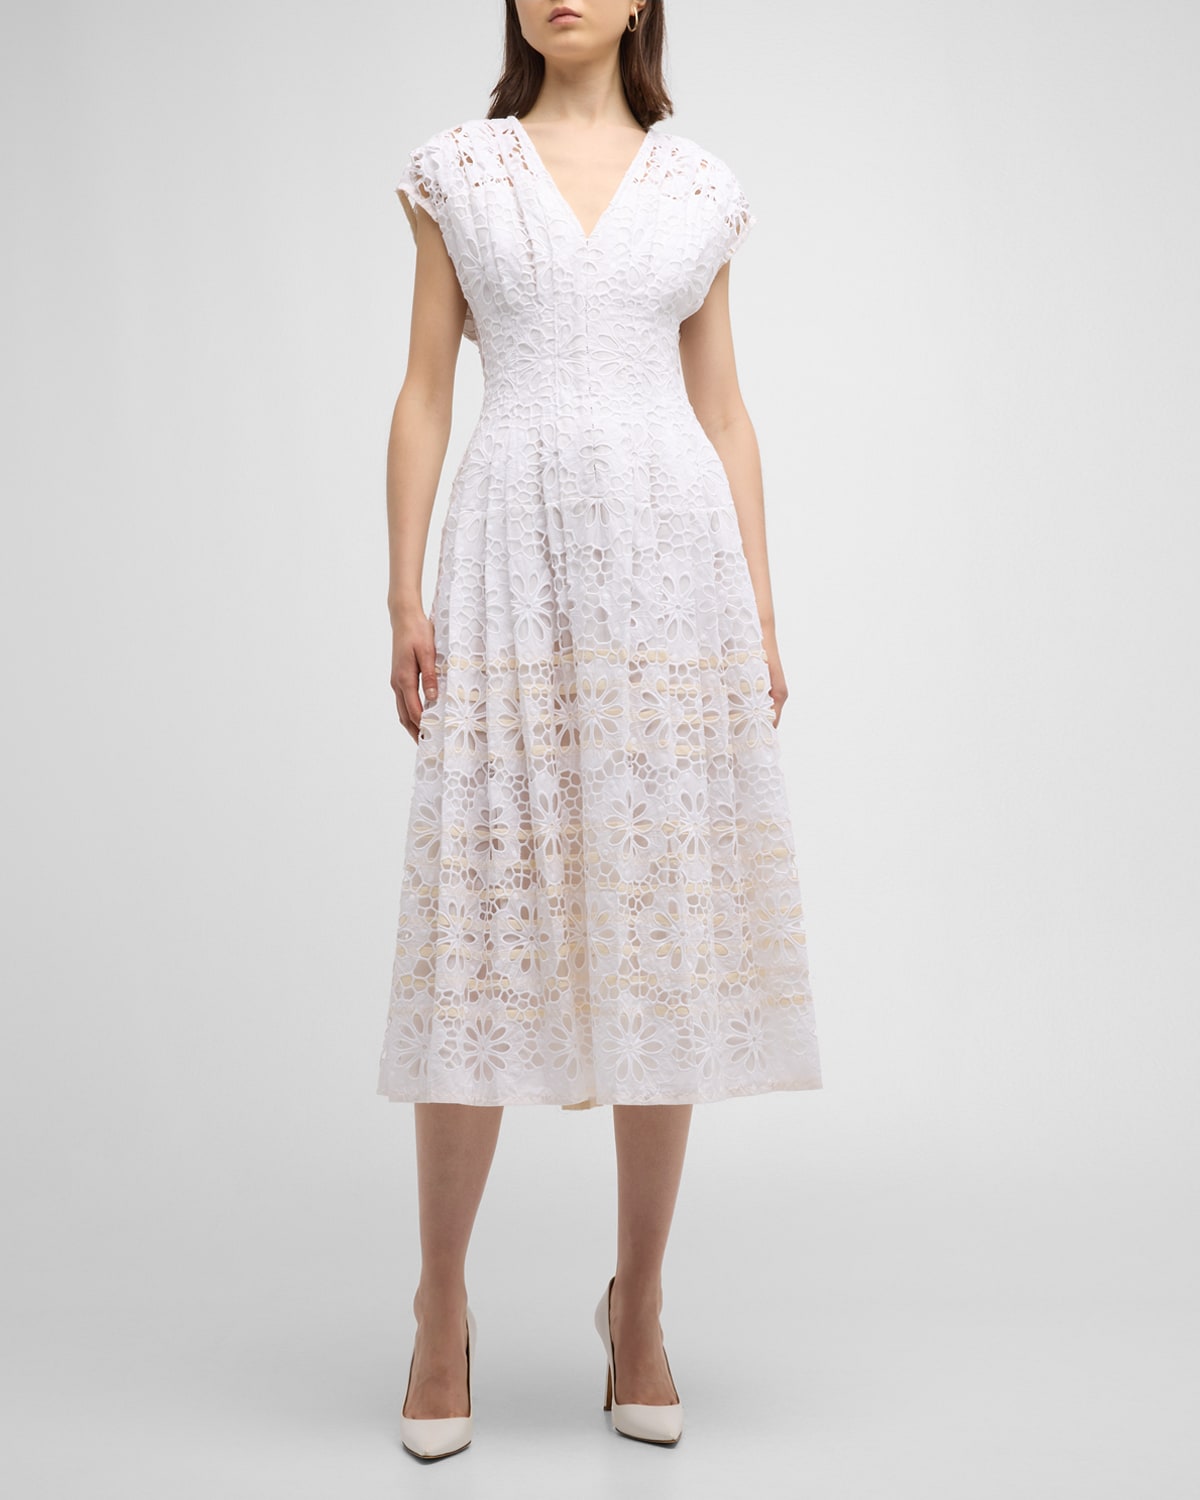 TORY BURCH CLAIRE MCCARDELL EYELET-EMBROIDERED MIDI DRESS